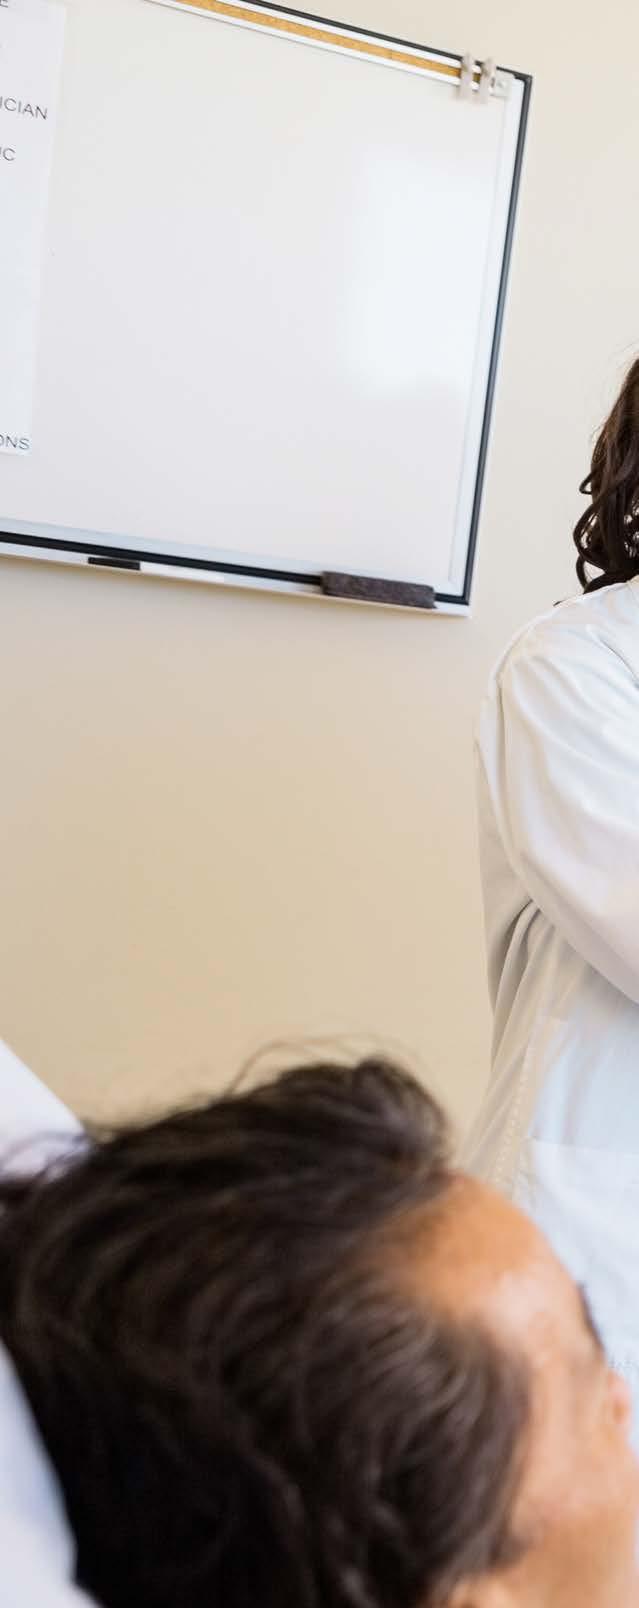 WHO SHOULD APPLY The Visiting Scholars Program is open to early career physicians, junior faculty, fellows, residents, and individuals holding Masters or Doctorate degrees in public health, health